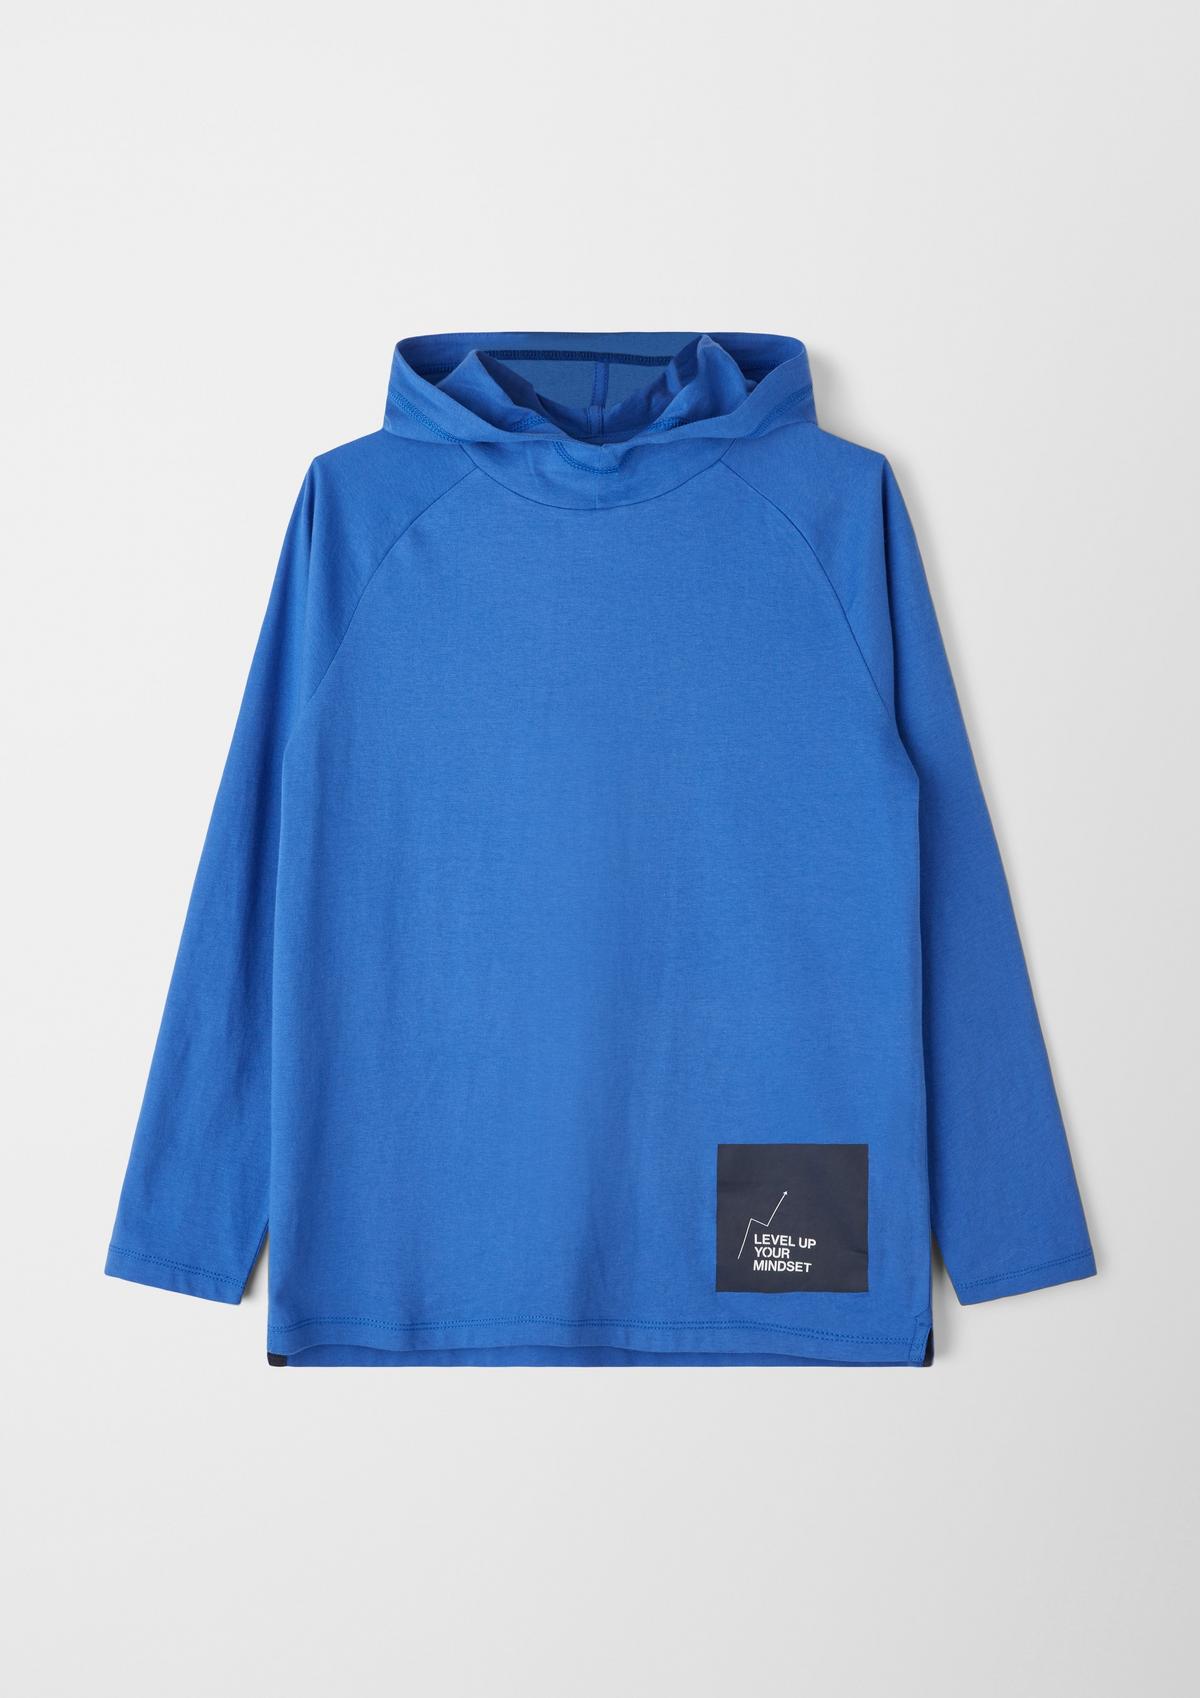 s.Oliver Long sleeve top with a hood